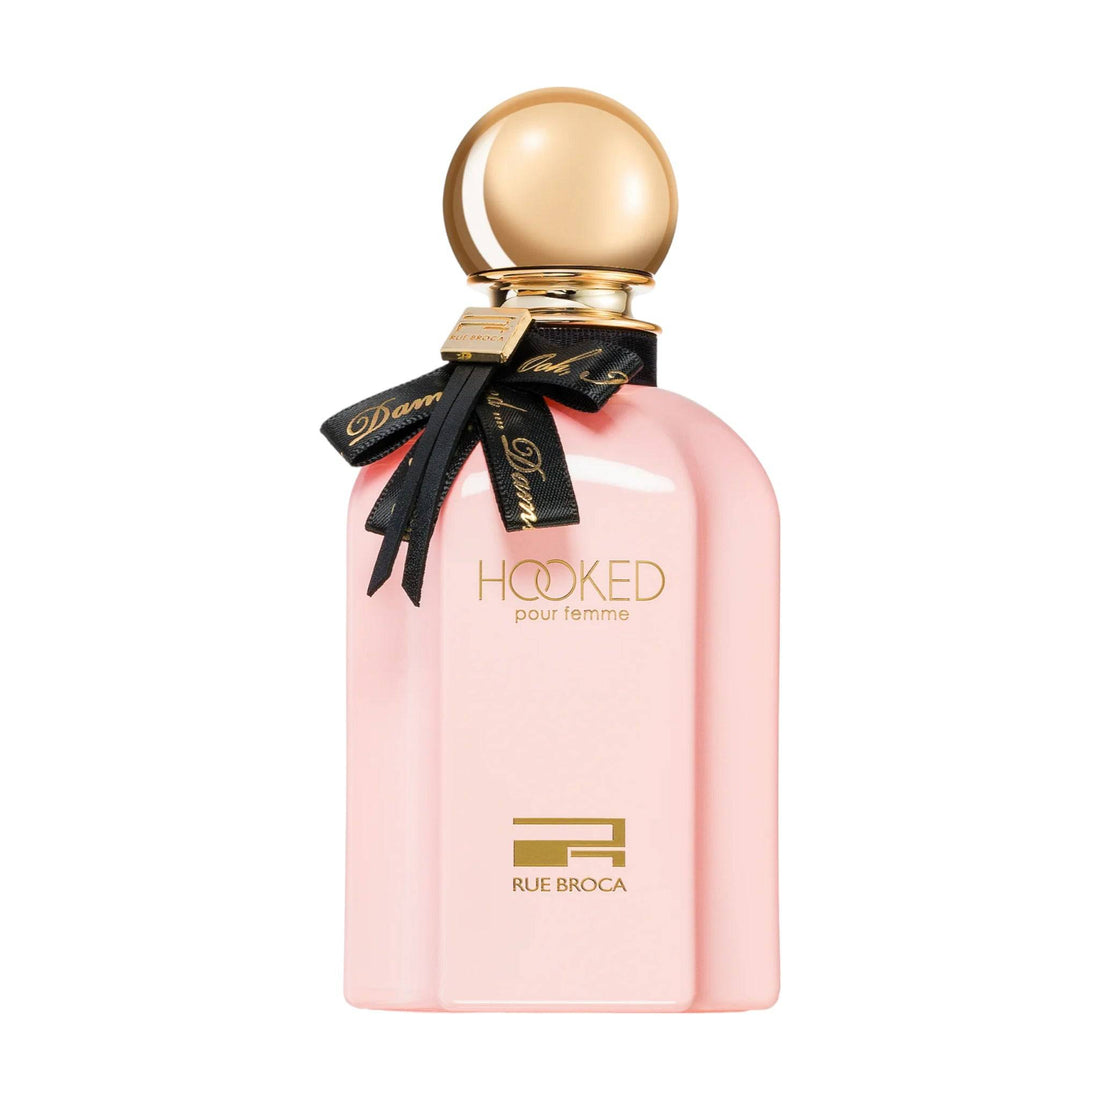 Luxurious 100ml bottle of Rue Broca Hooked Pour Femme Eau de Parfum, representing its blend of spicy and fruity notes.